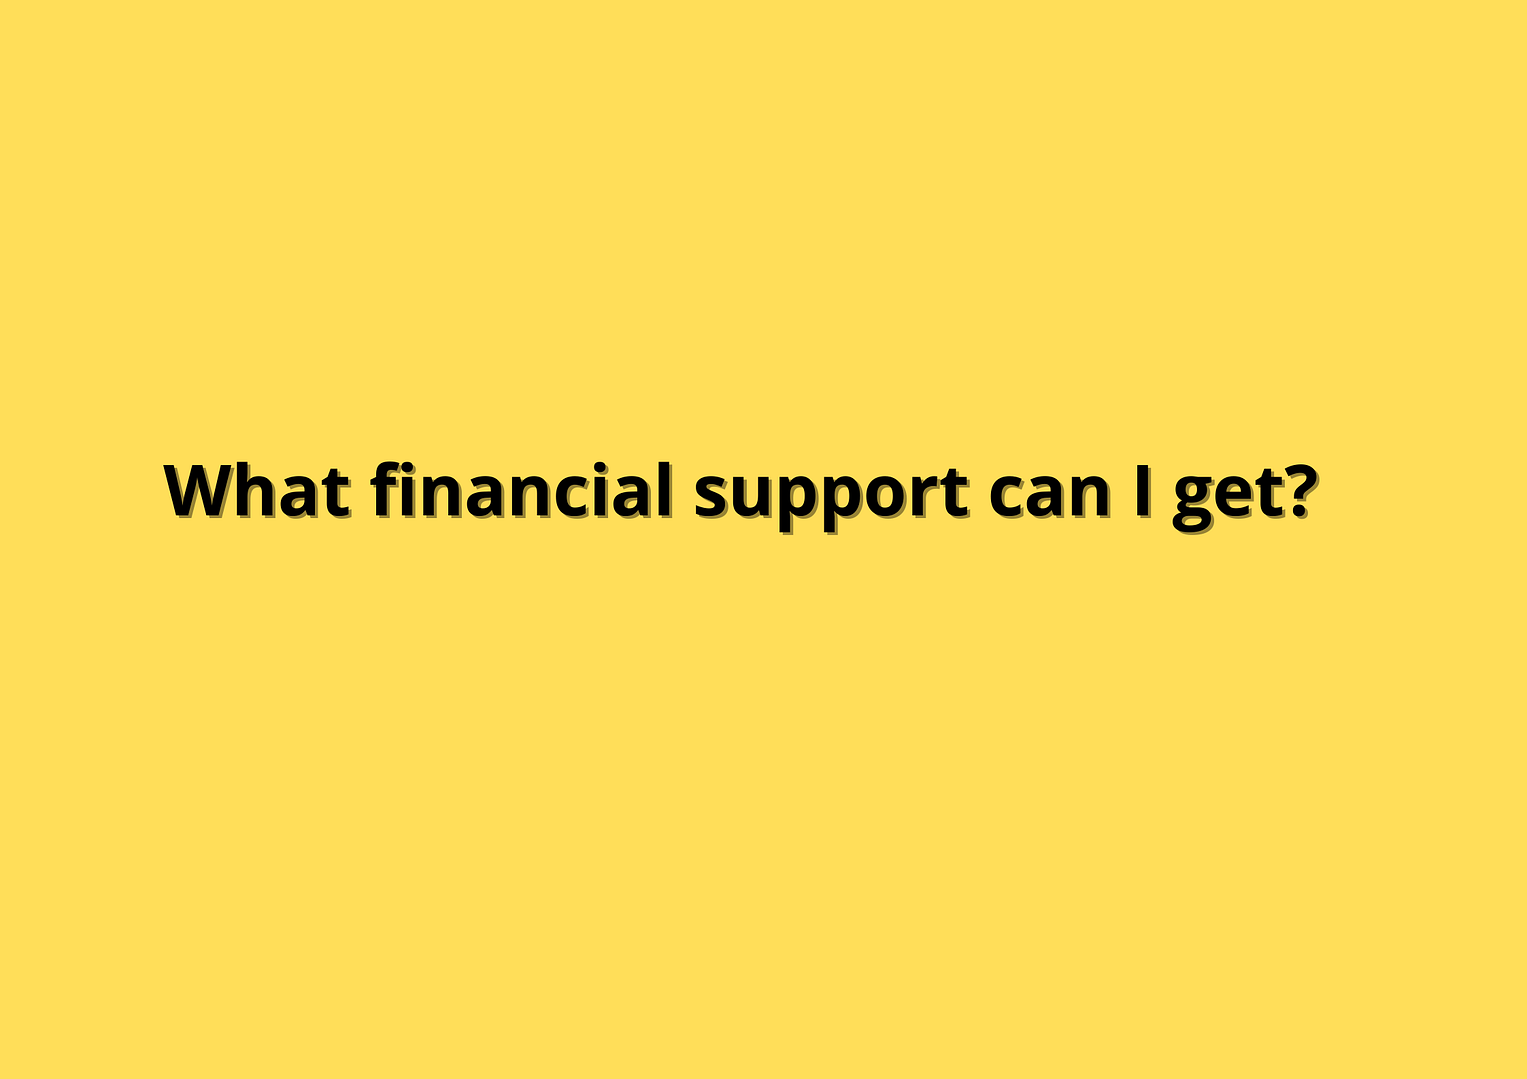 Financial Support - Covid